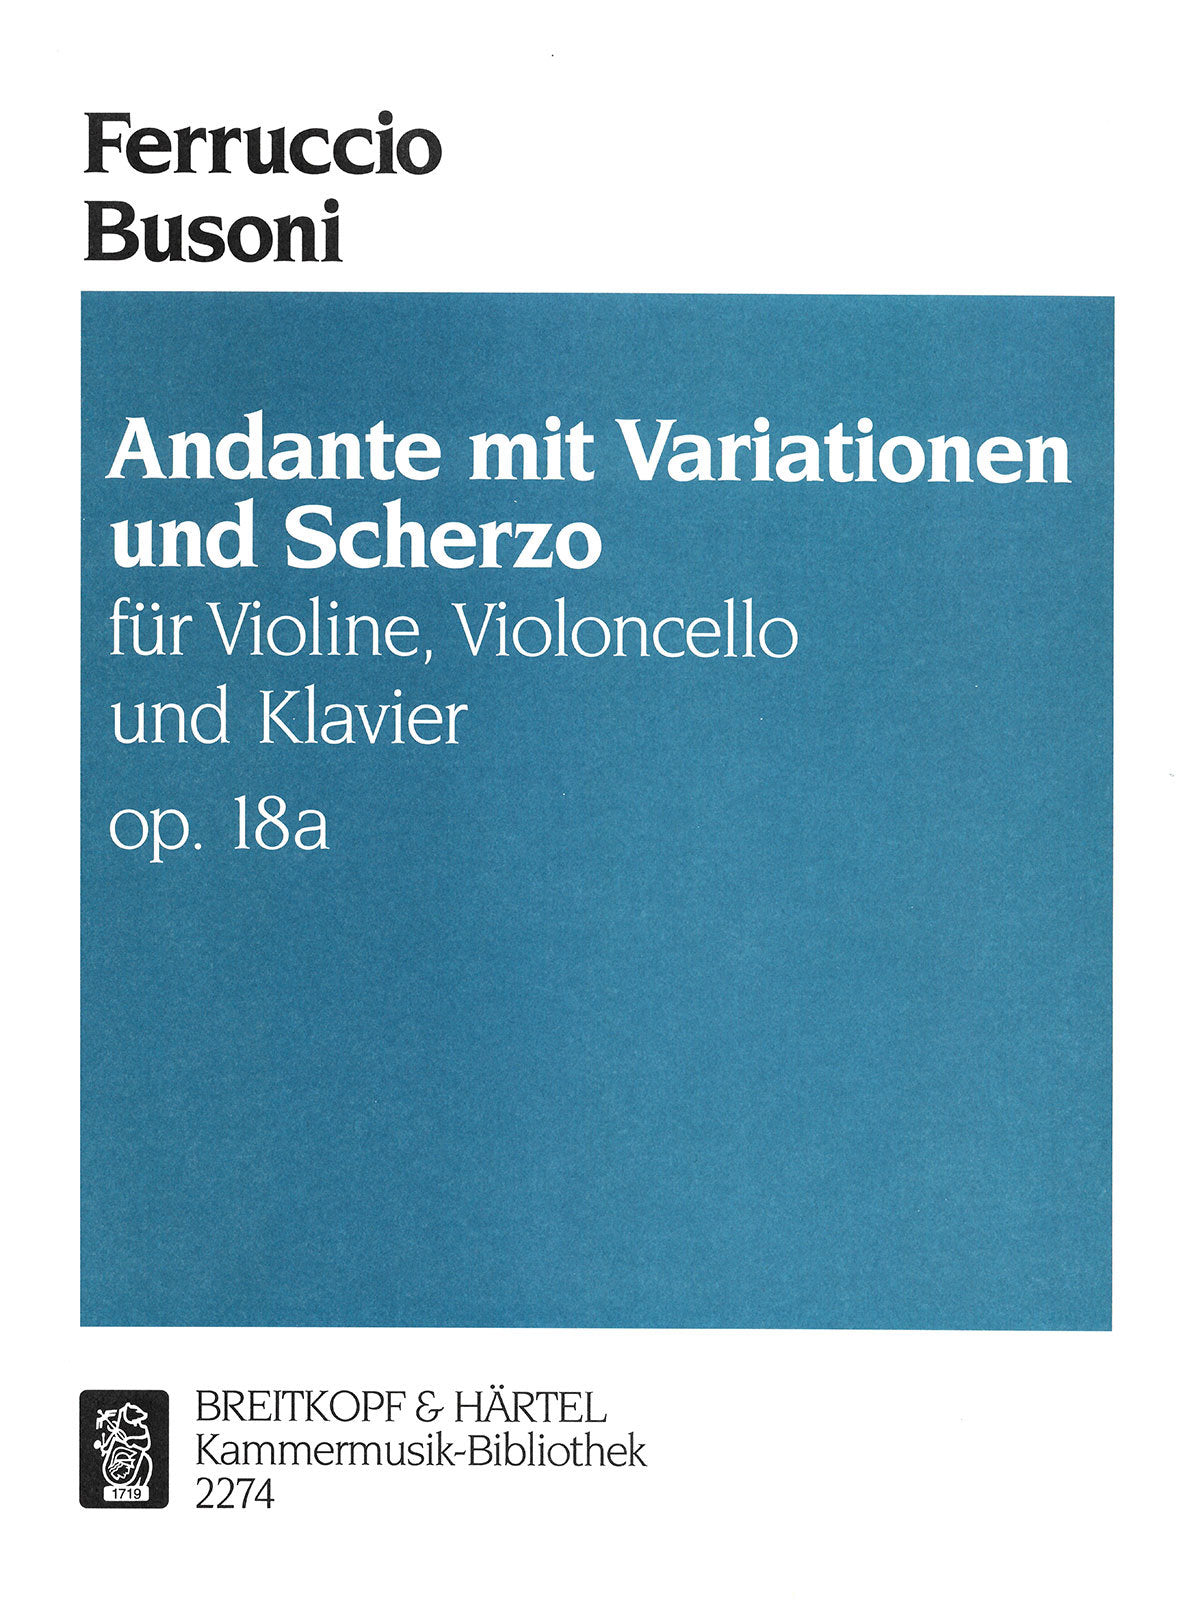 Busoni: Andante with Variations and Scherzo, Op. 18a